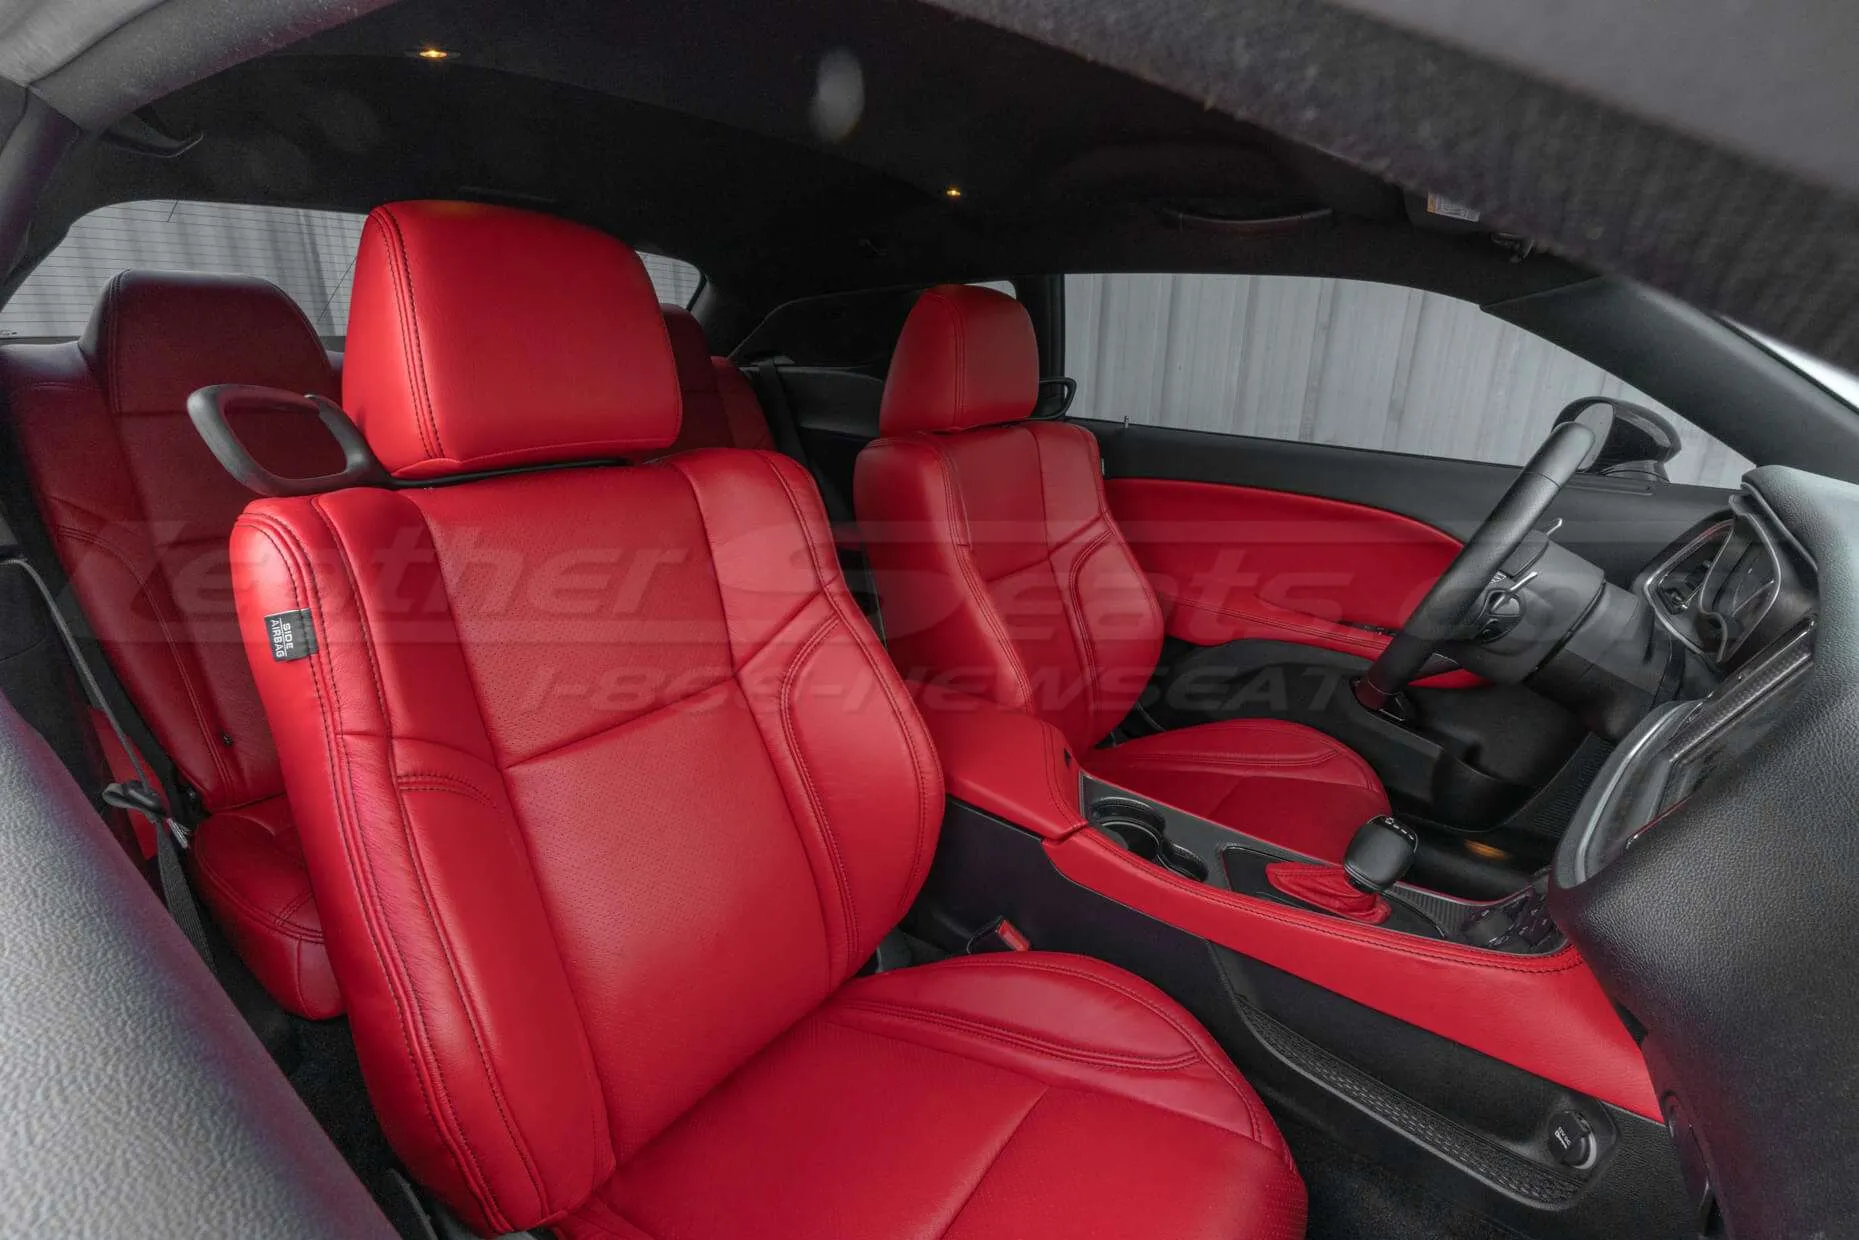 Full Dodge Challenger Hellcat Bright Red leather interior